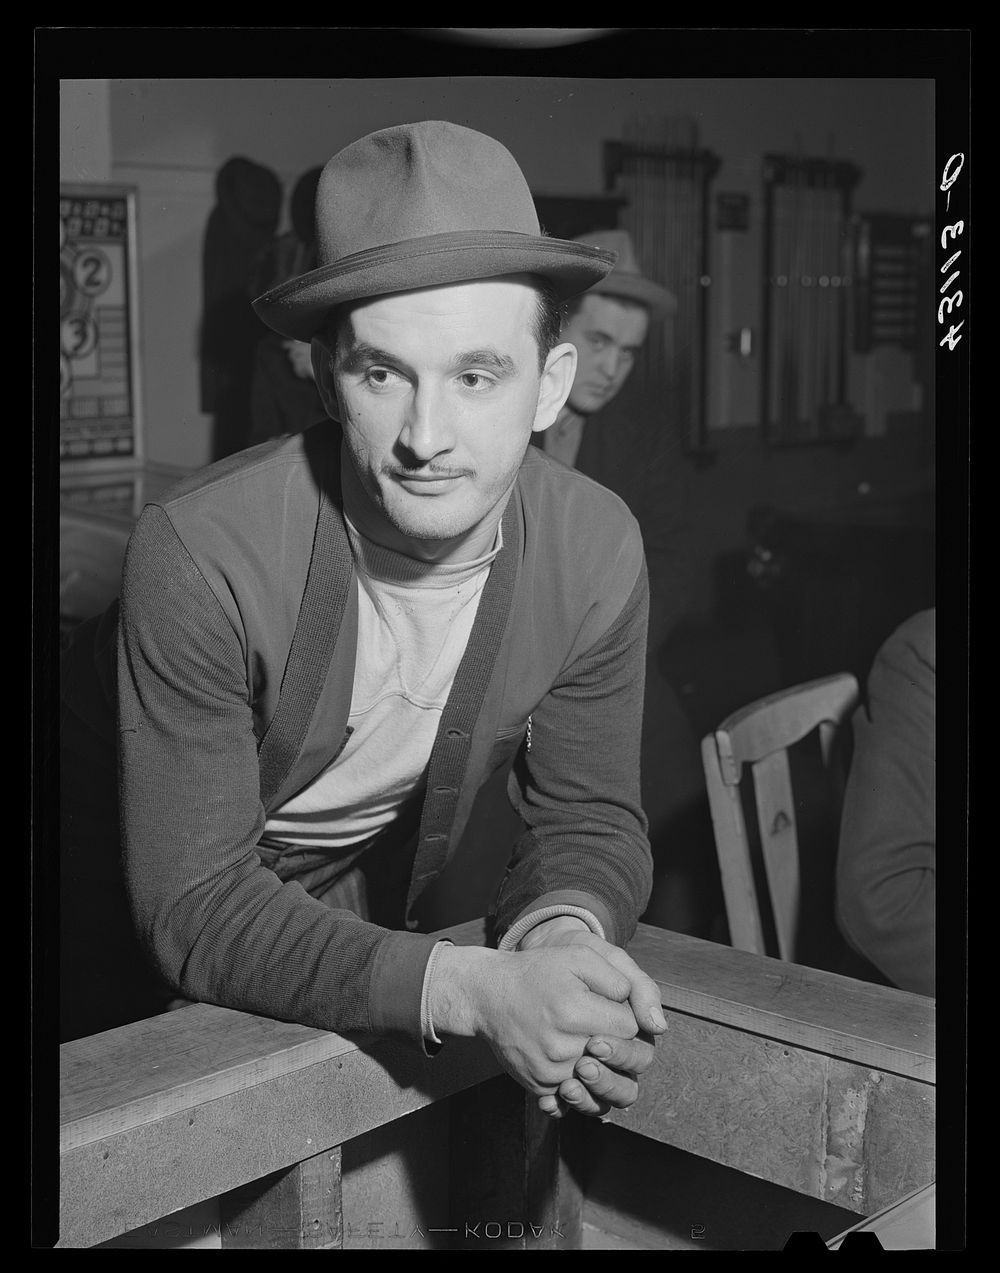 Steelworker president of the Serbian Club. Aliquippa, Pennsylvania. Sourced from the Library of Congress.